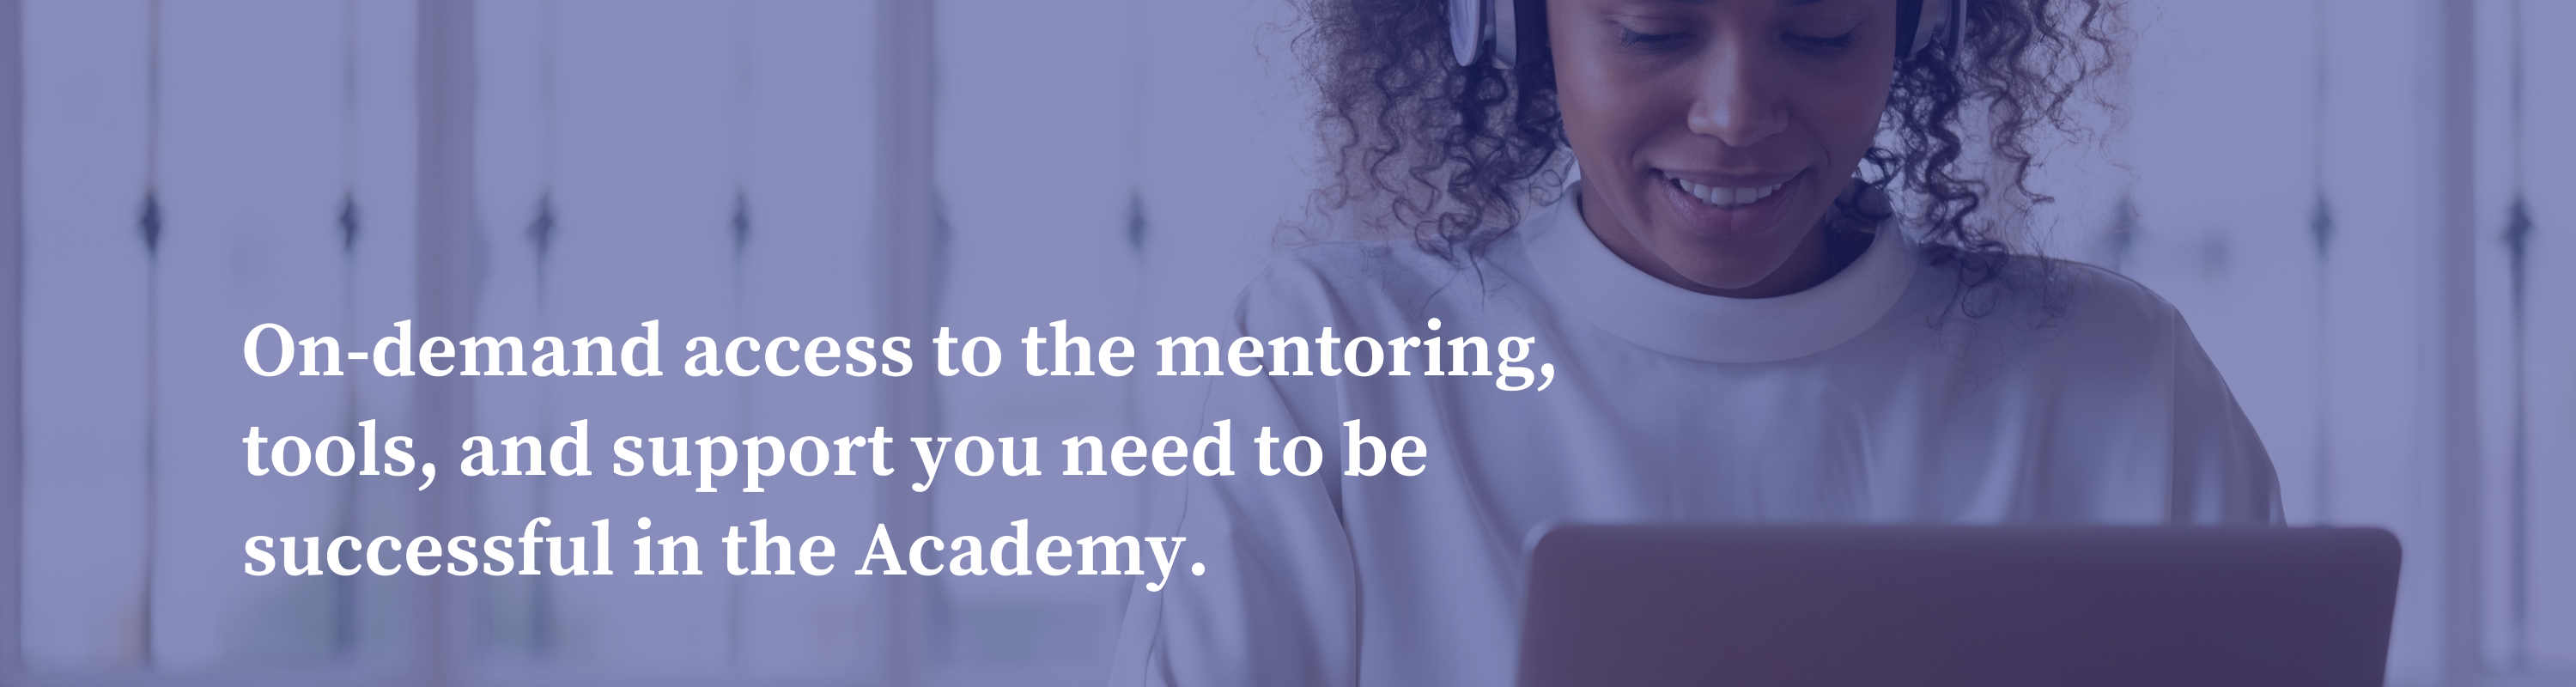 On-demand access to the mentoring, tools, and support you need to be successful in the Academy (8)